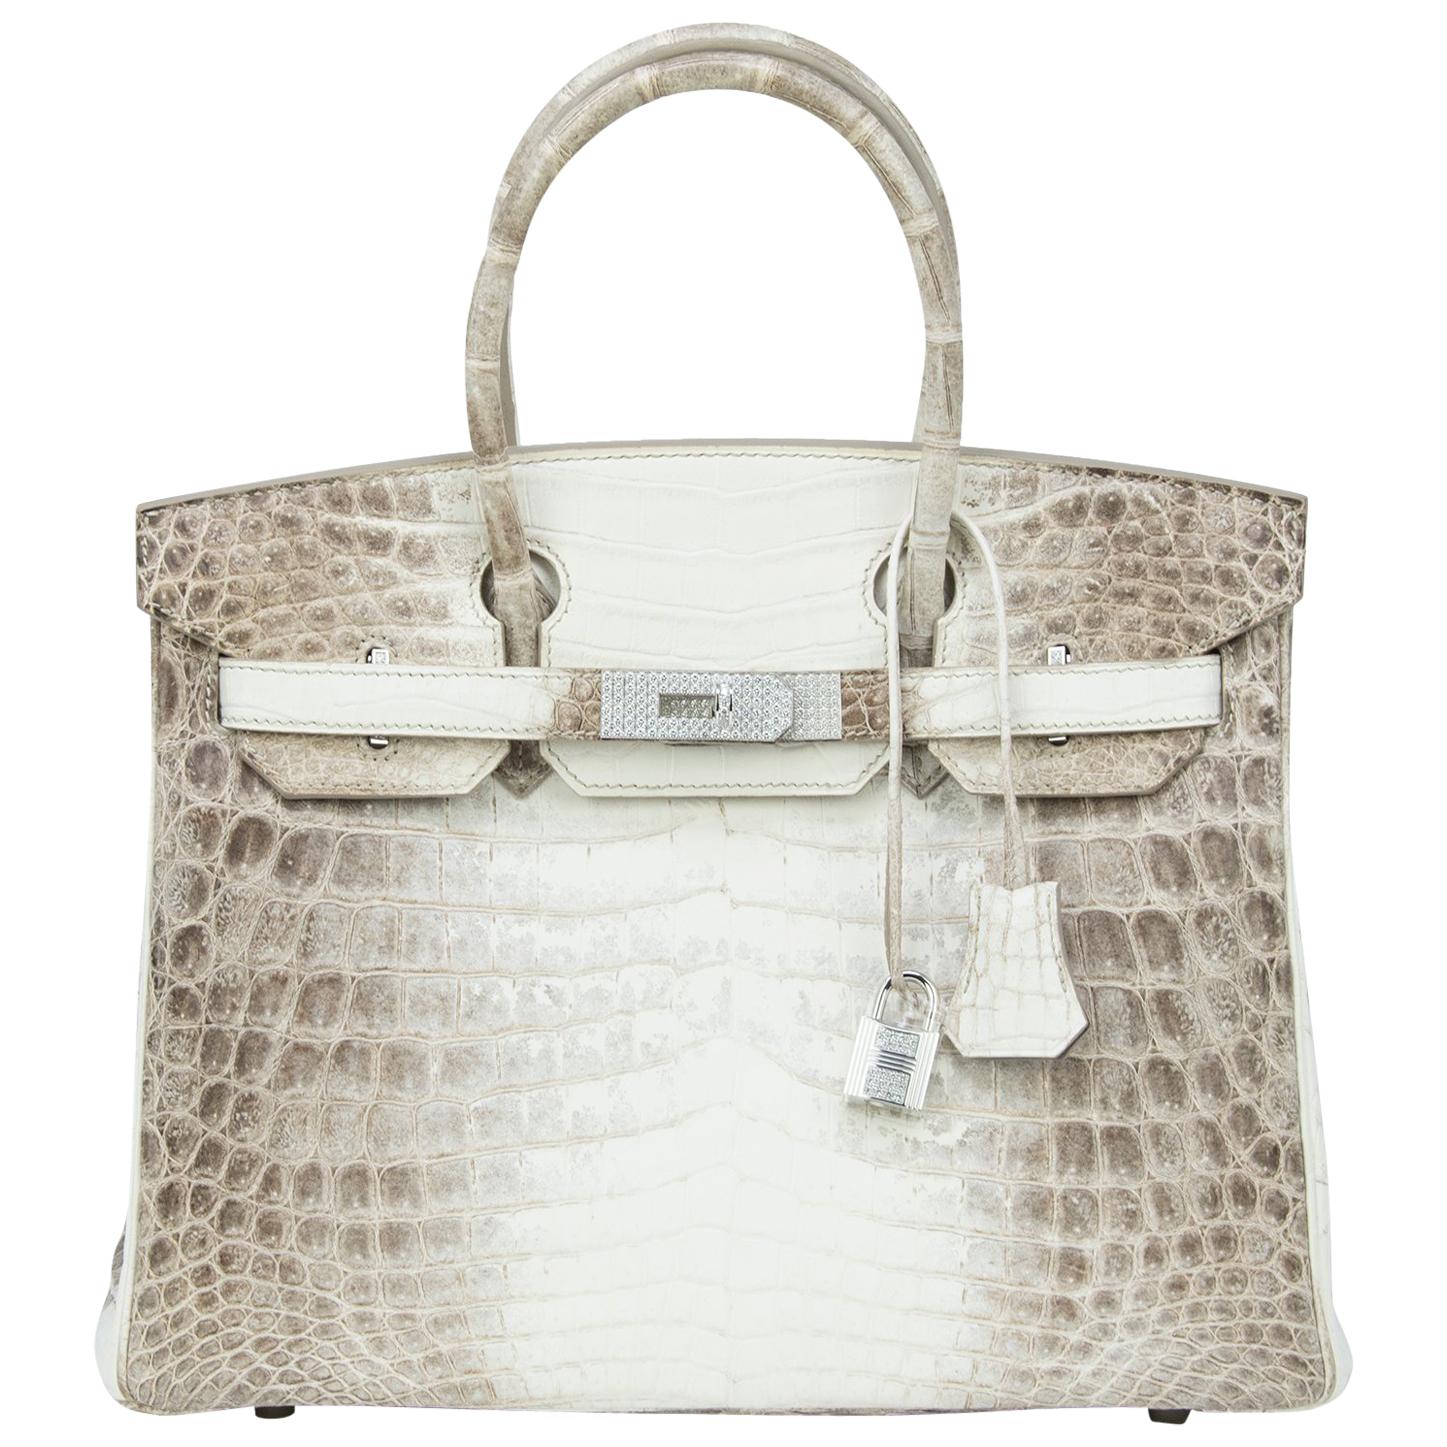 This is a most rare offering of the highly collectible Himalayan collection produced by Hermes. Absolutely breathtaking and spectacular, the Diamond Himalayan Birkin is teaming up with the matching Kelly GM Himalayan Diamond Bracelet, a most coveted